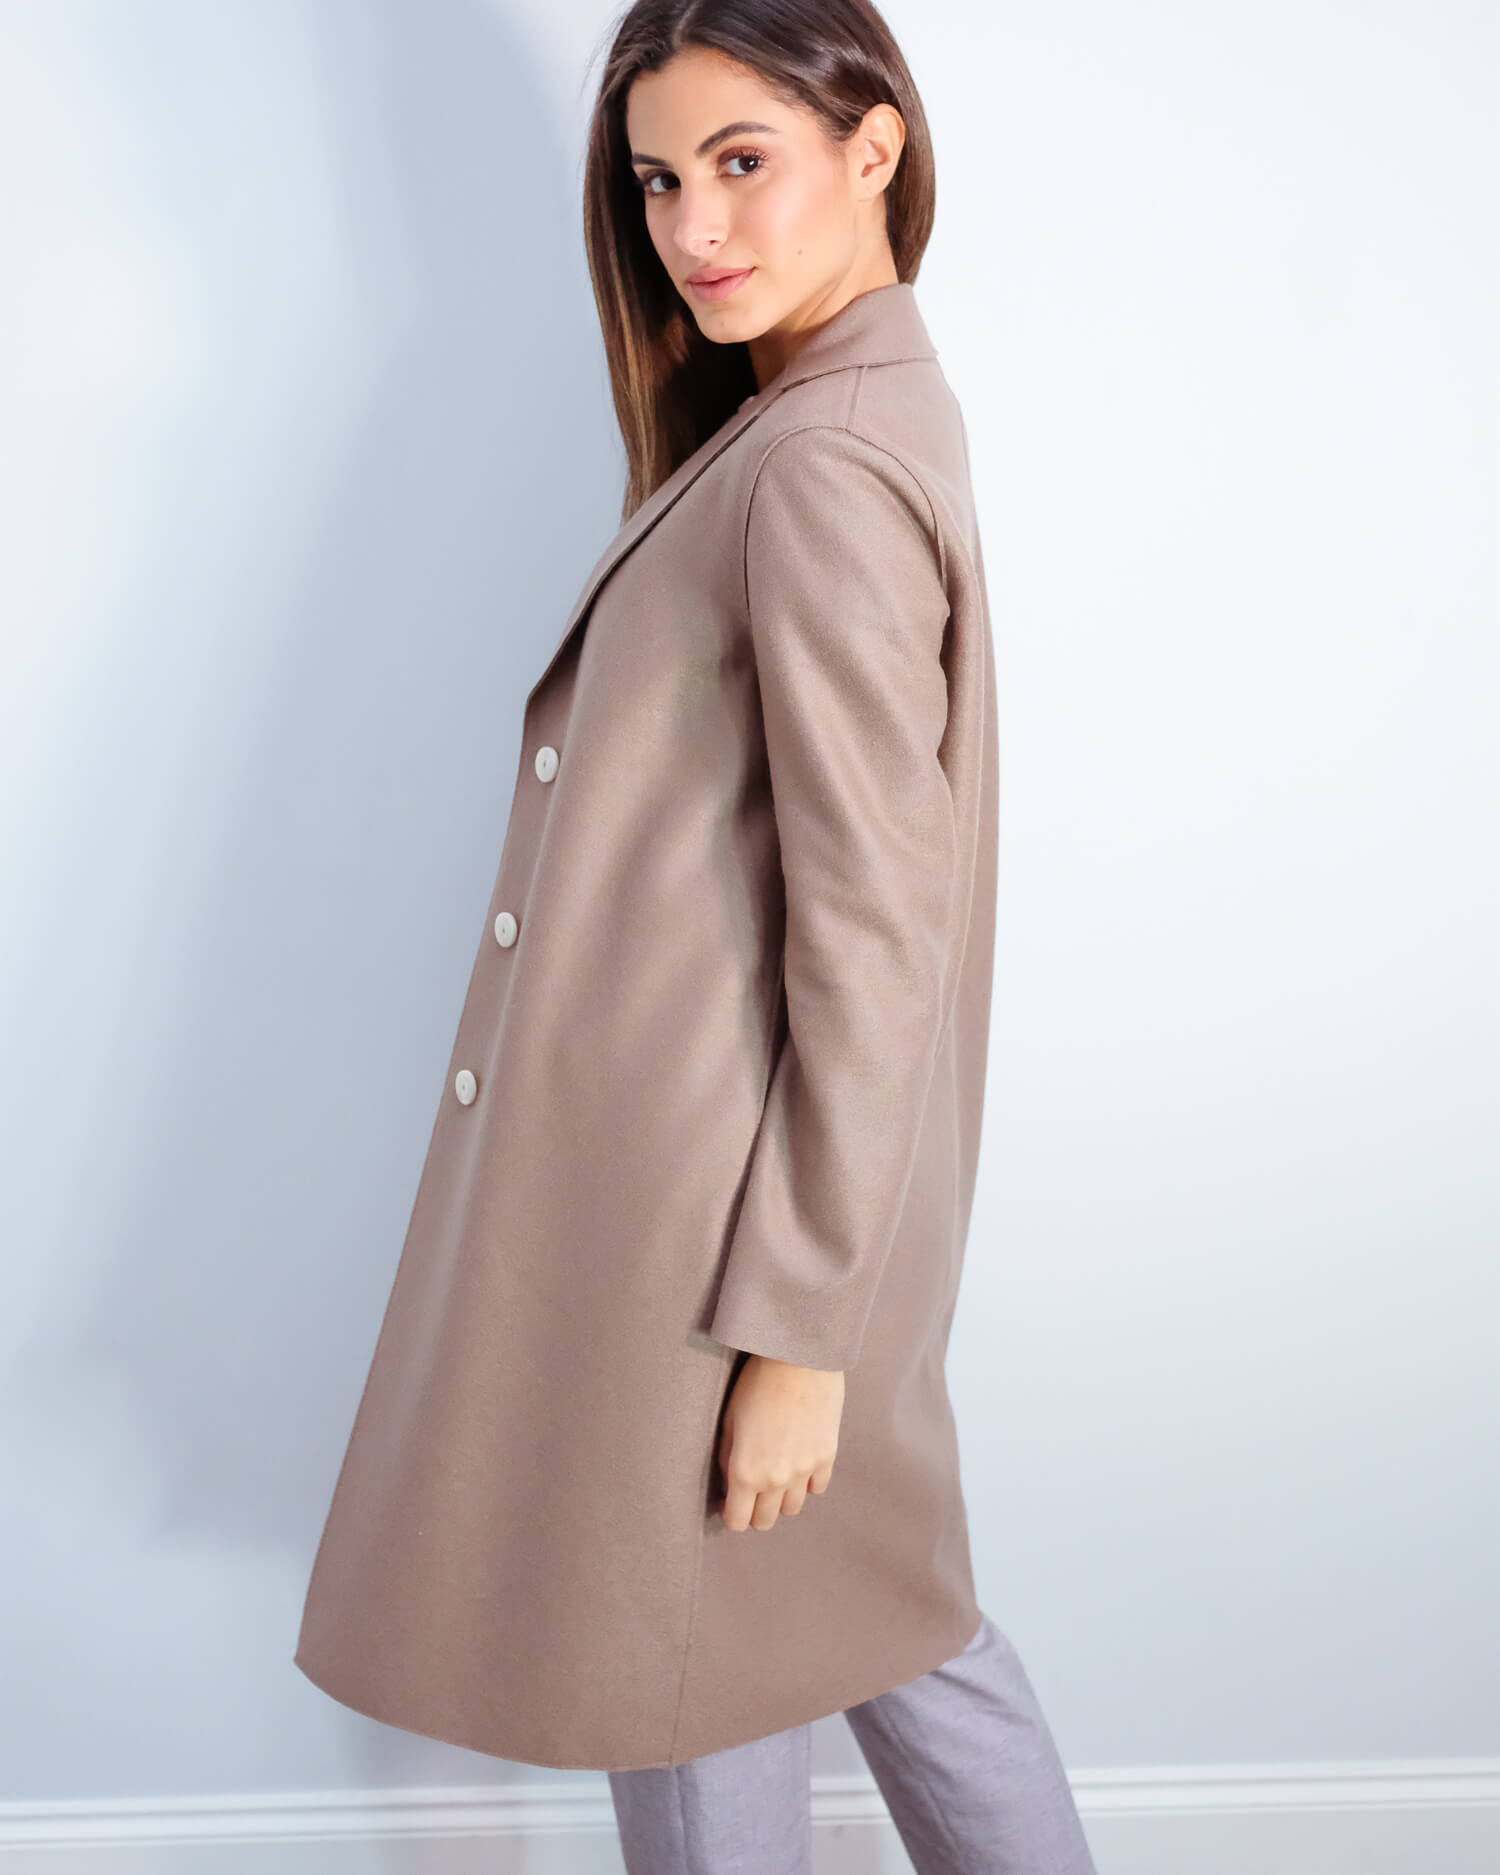 HWL Pressed wool overcoat in taupe